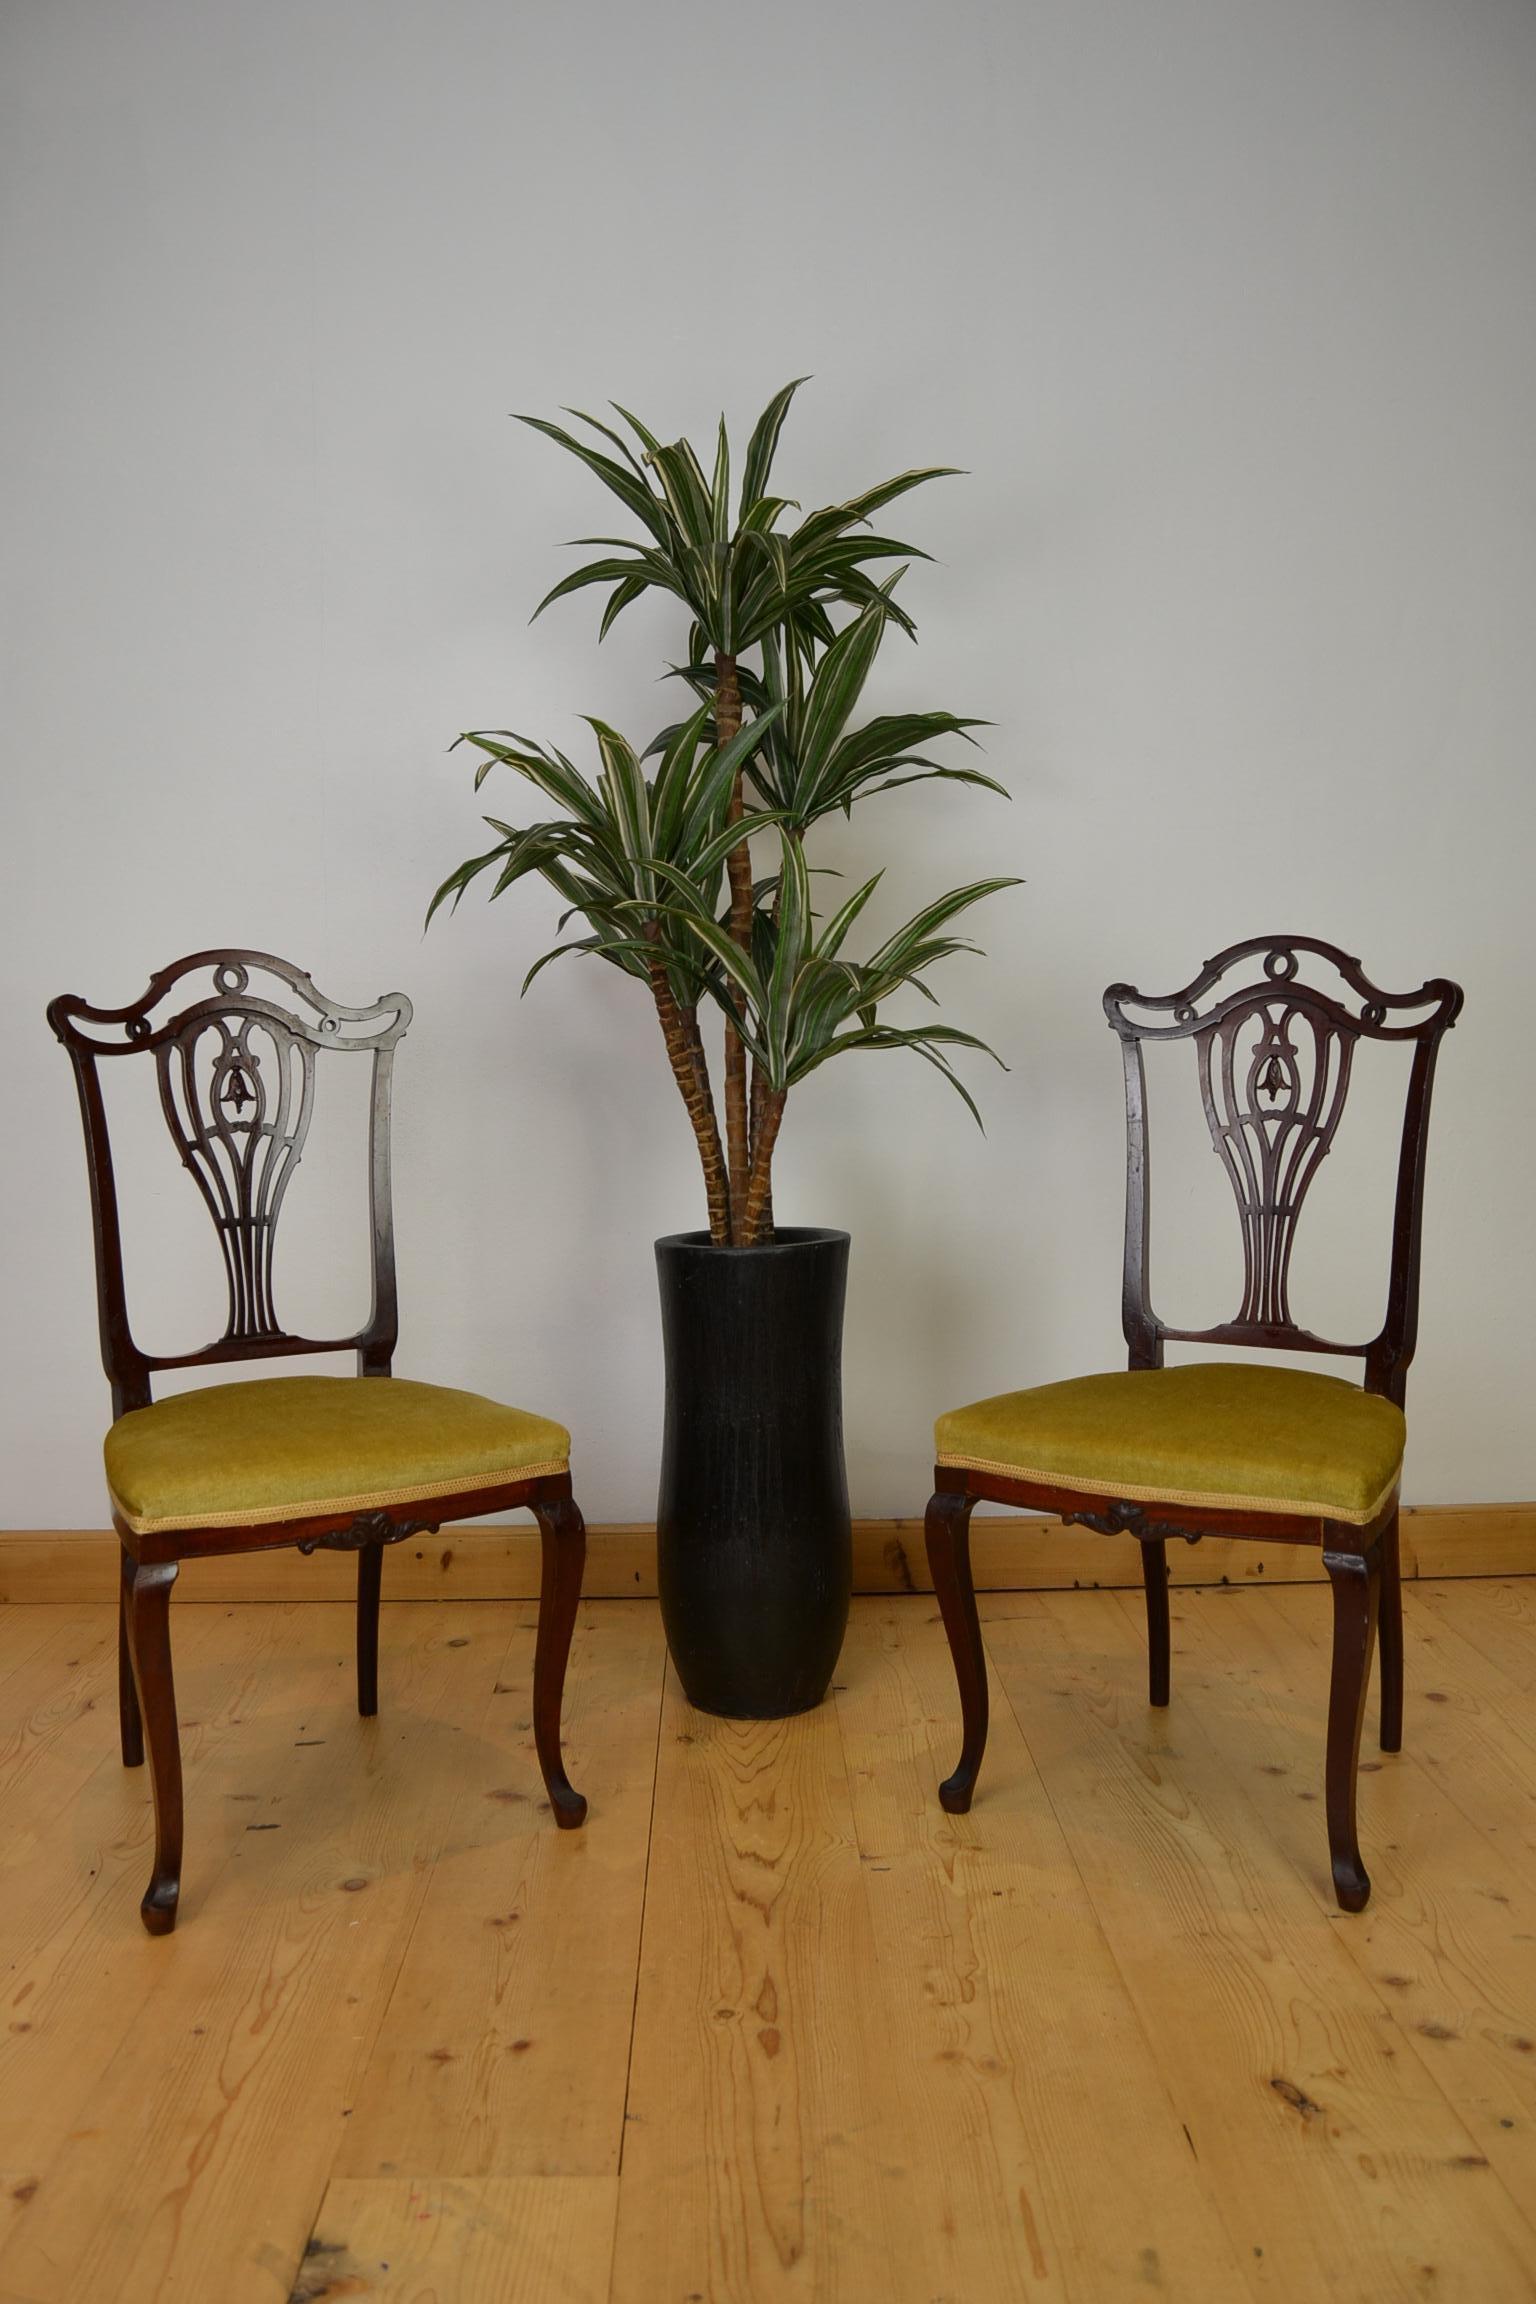 Pair of Antique Hollandia Pander & Zn Mahogany Side Chairs of the Late 19th Century. It's an elegant pair of antique side chairs. 
By Hollandia Pander and sons - marked under.
These chairs from the Netherlands are in the style of Hepplewhite,